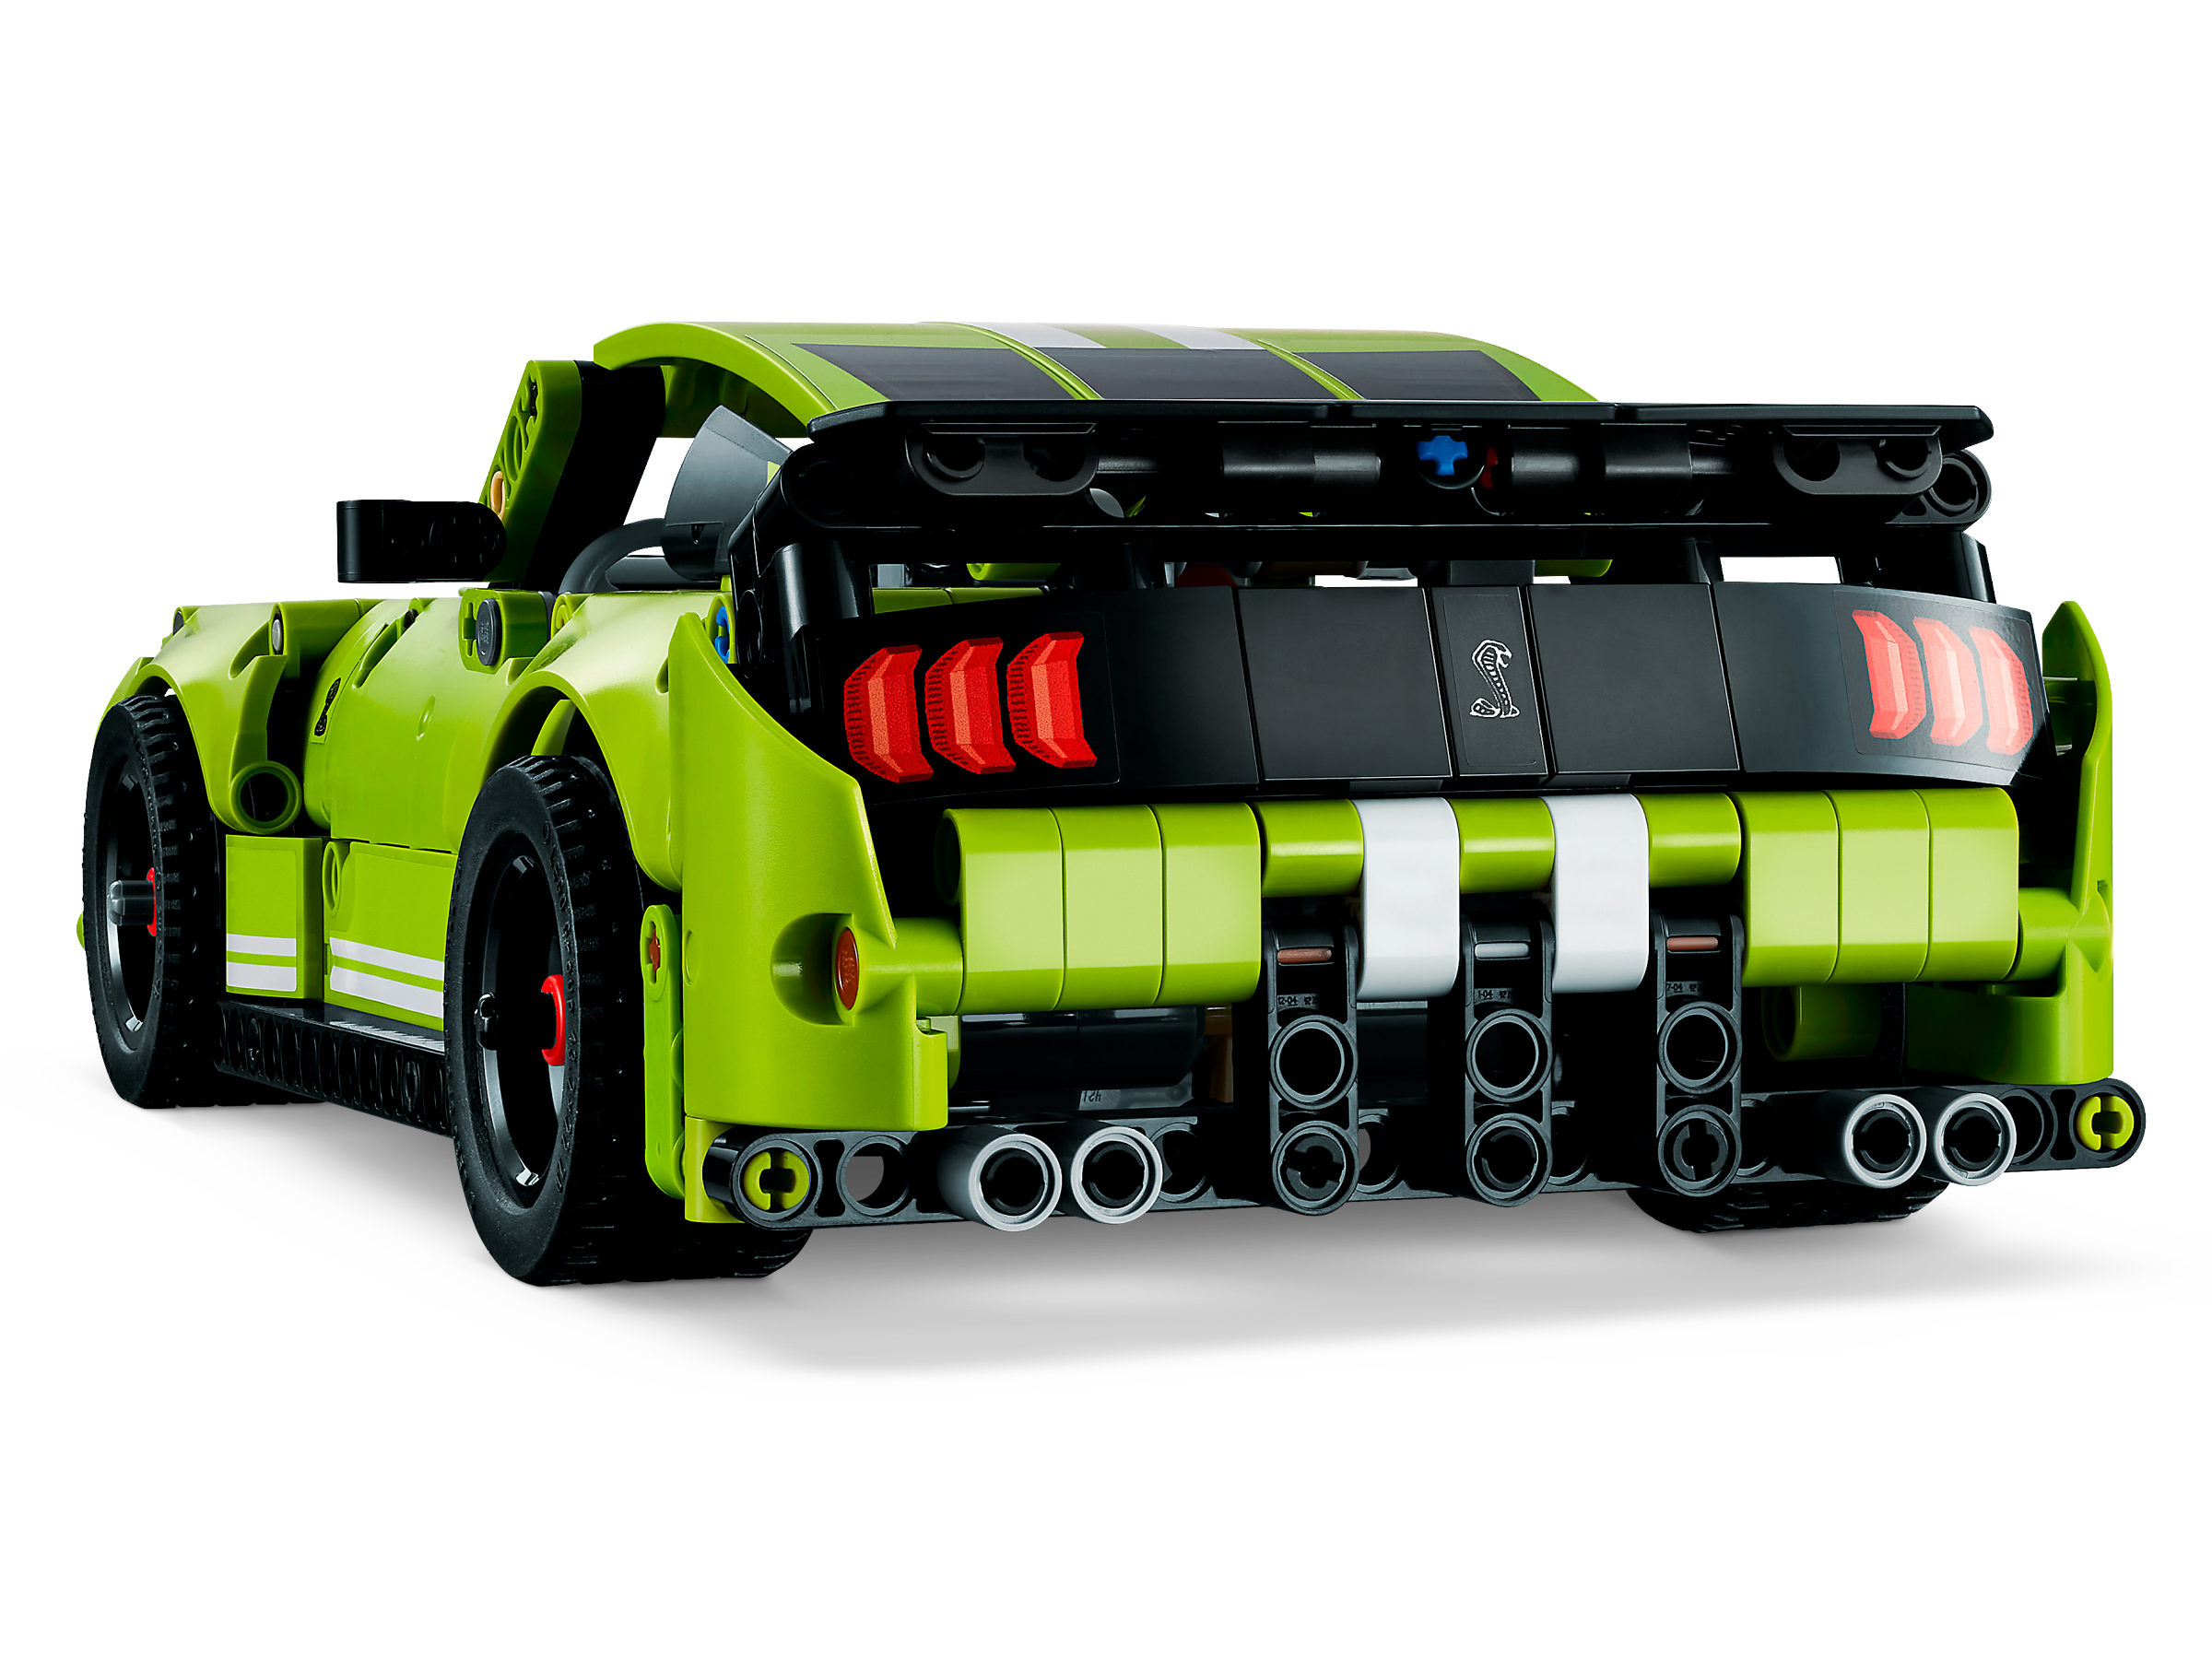 Lego®technic 42138 - ford mustang shelby® gt500®, jeux de constructions &  maquettes